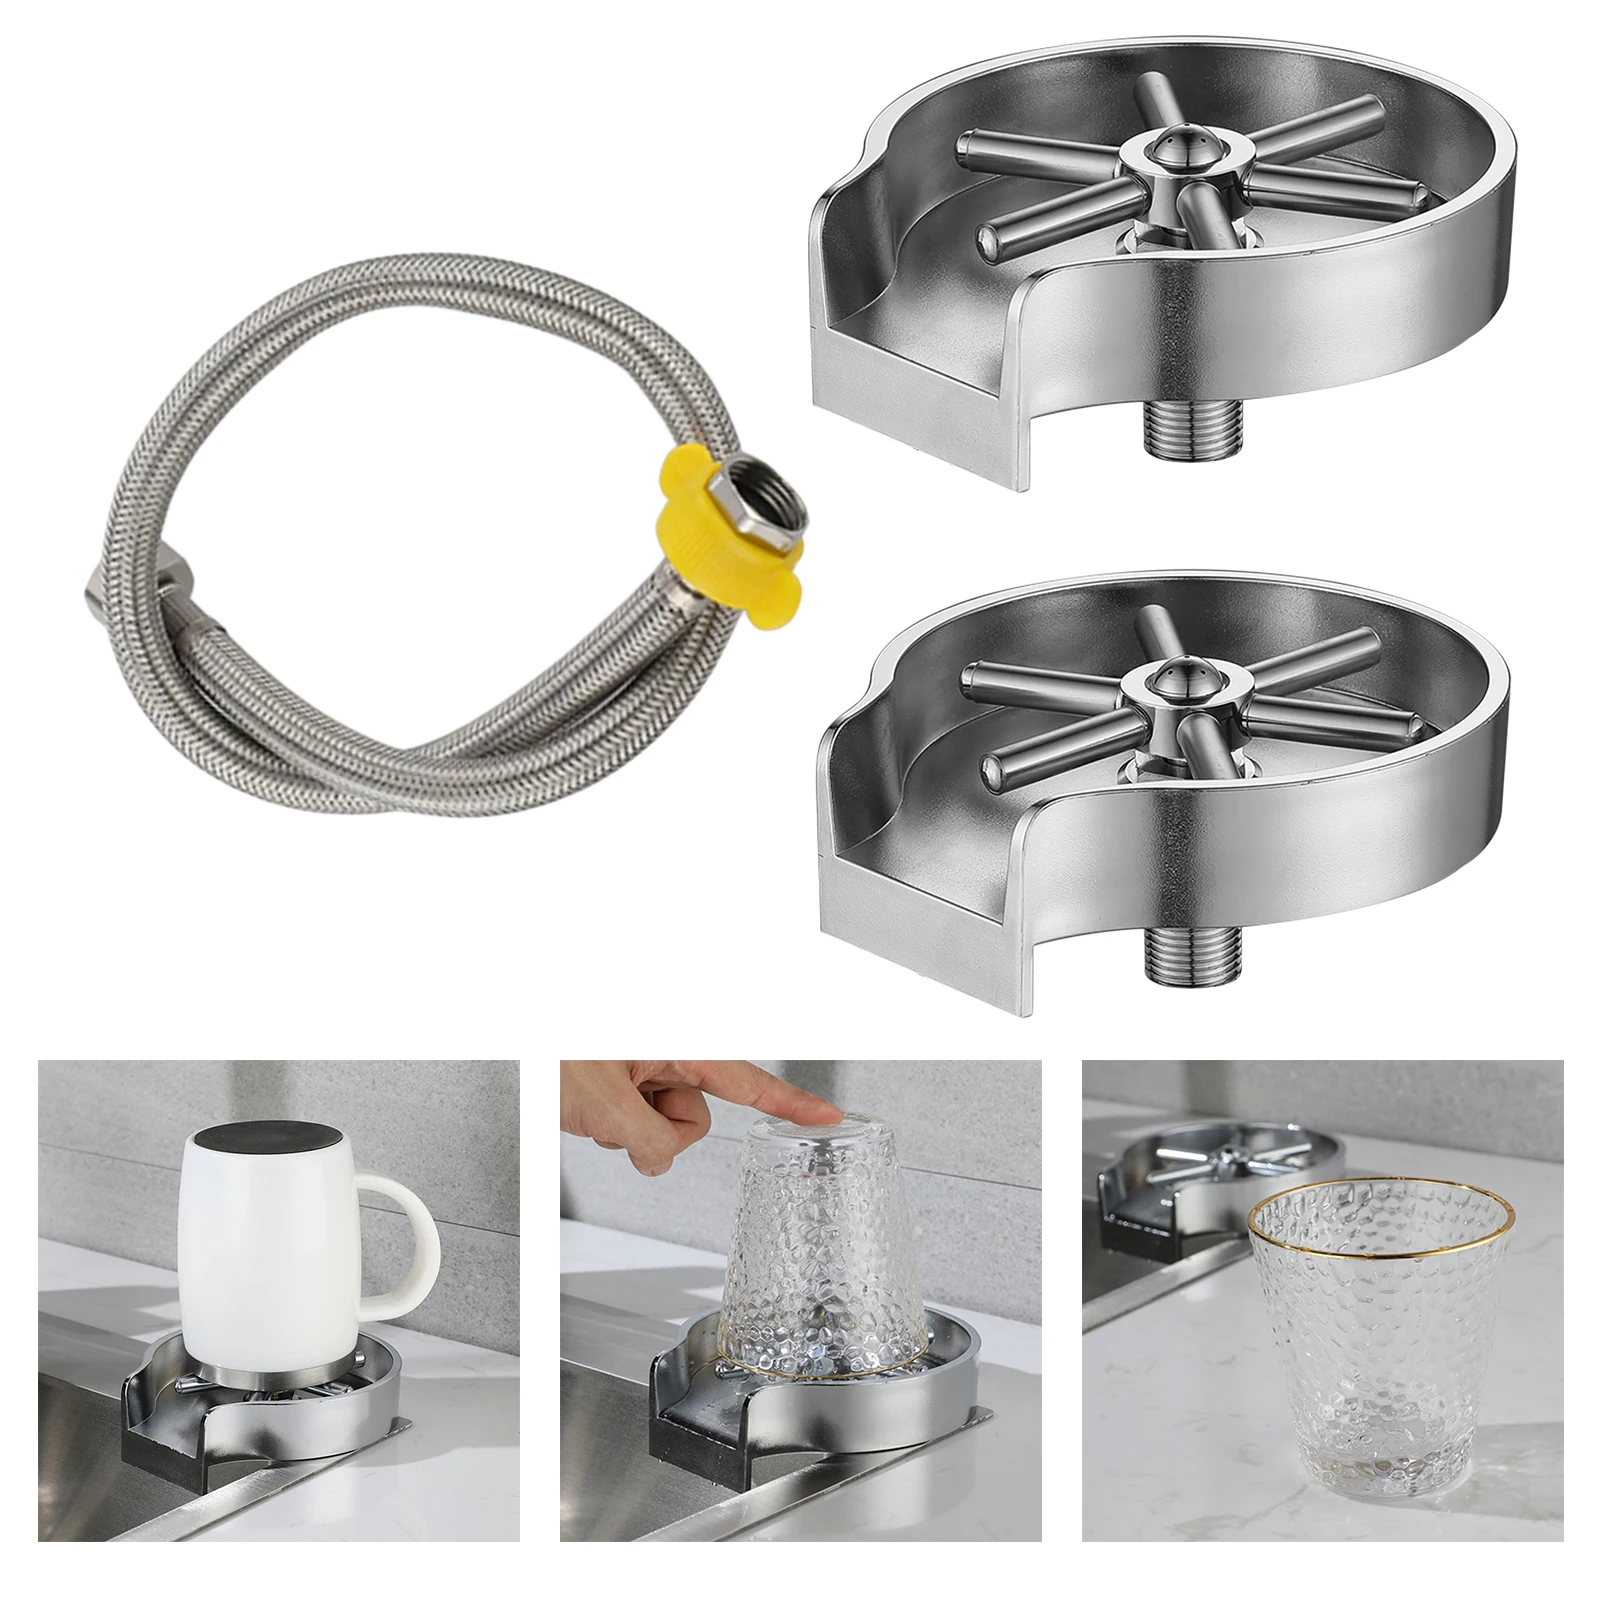 

High Pressure Glass Cup Rinser for Kitchen Sinks Beer Coffee Milk Tea Cup Pitcher Cleaner Glass Rinser Cafe Pubs Cafe Restaurant